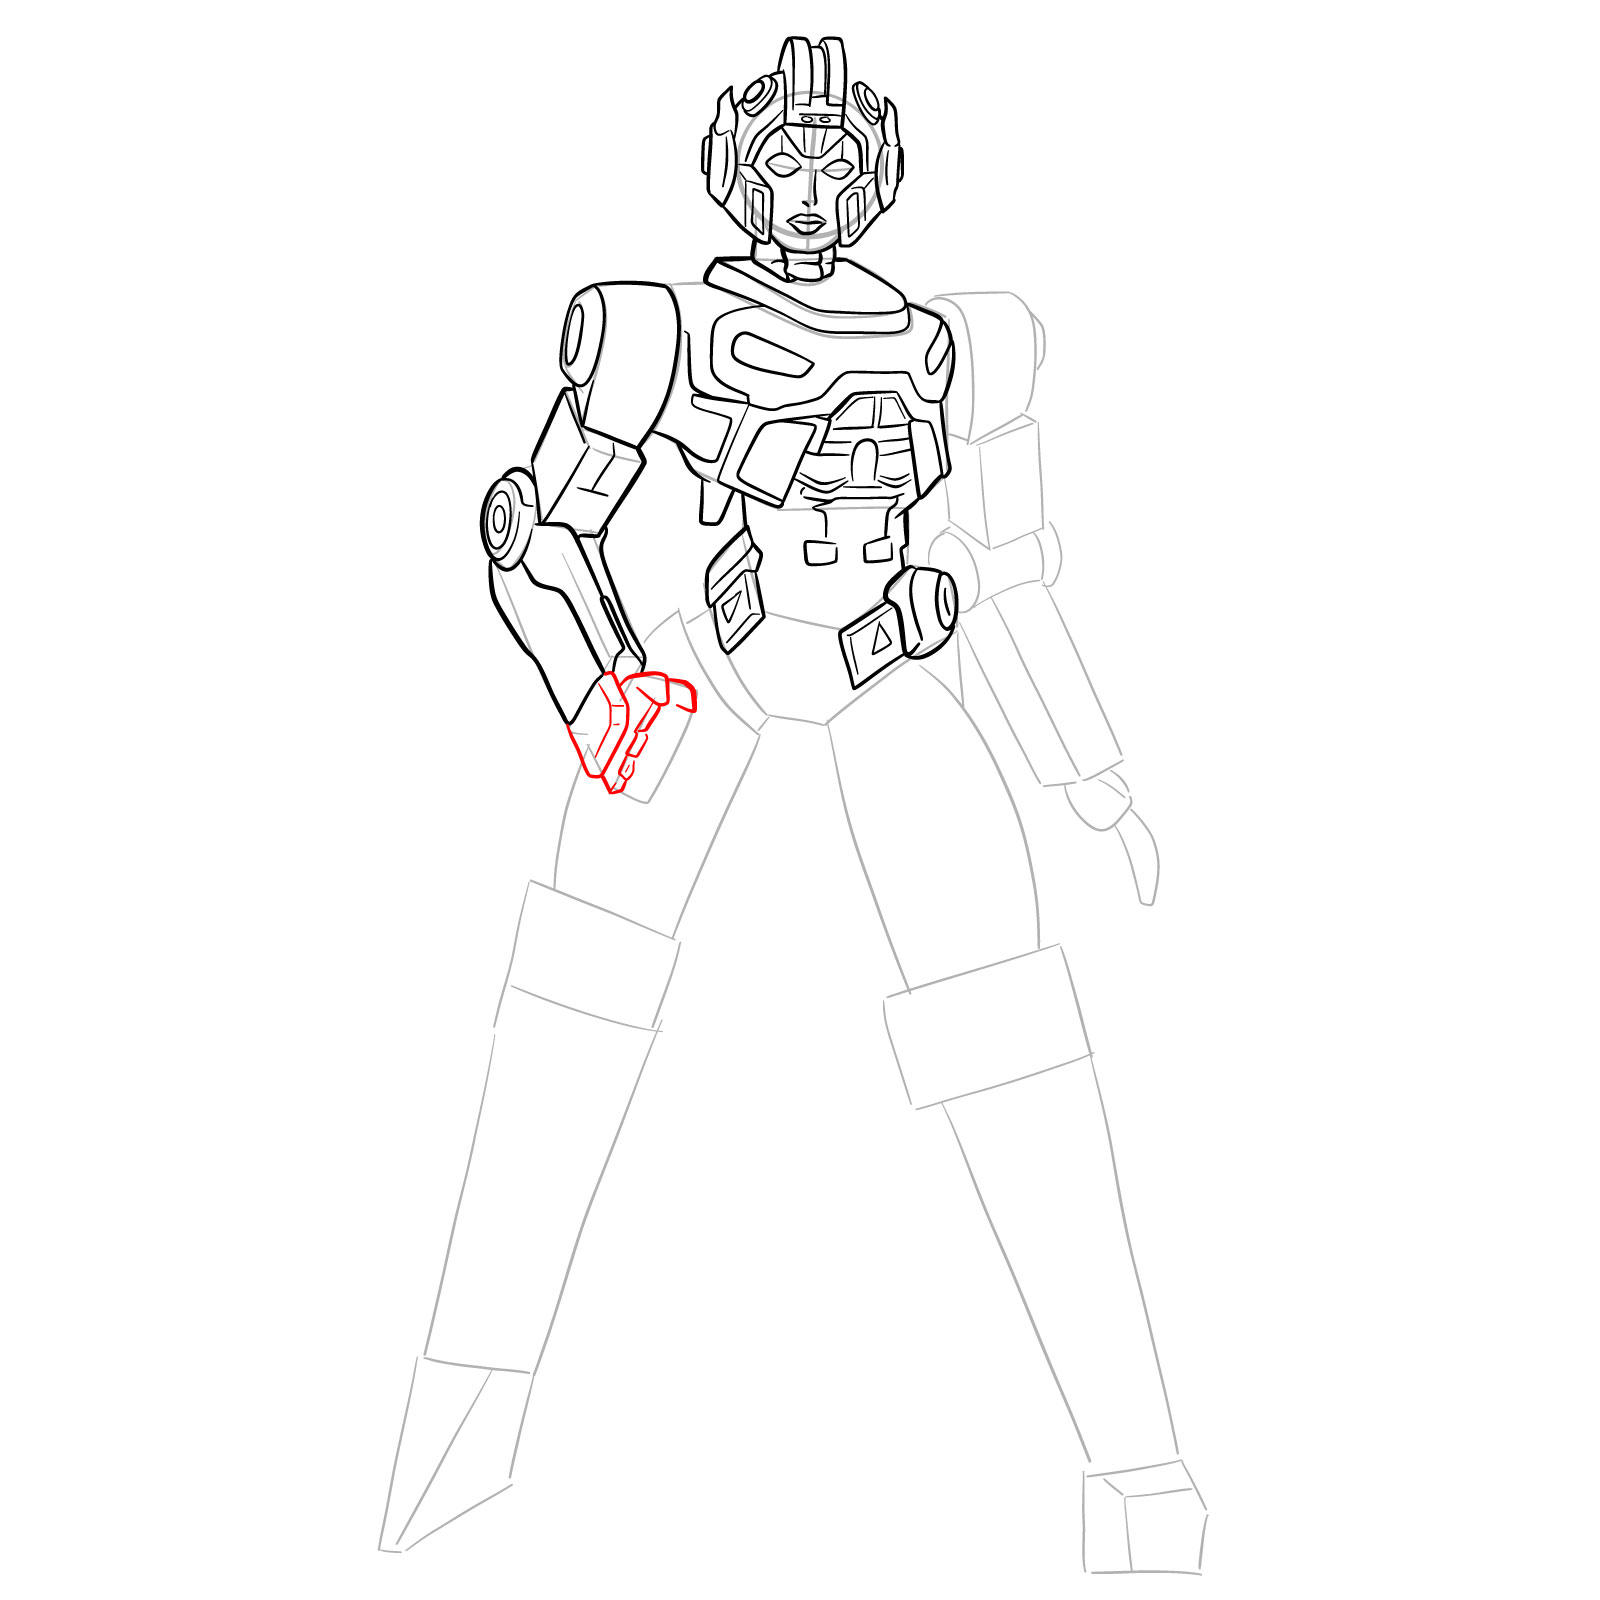 How to draw Arcee from Transformers Prime - step 23